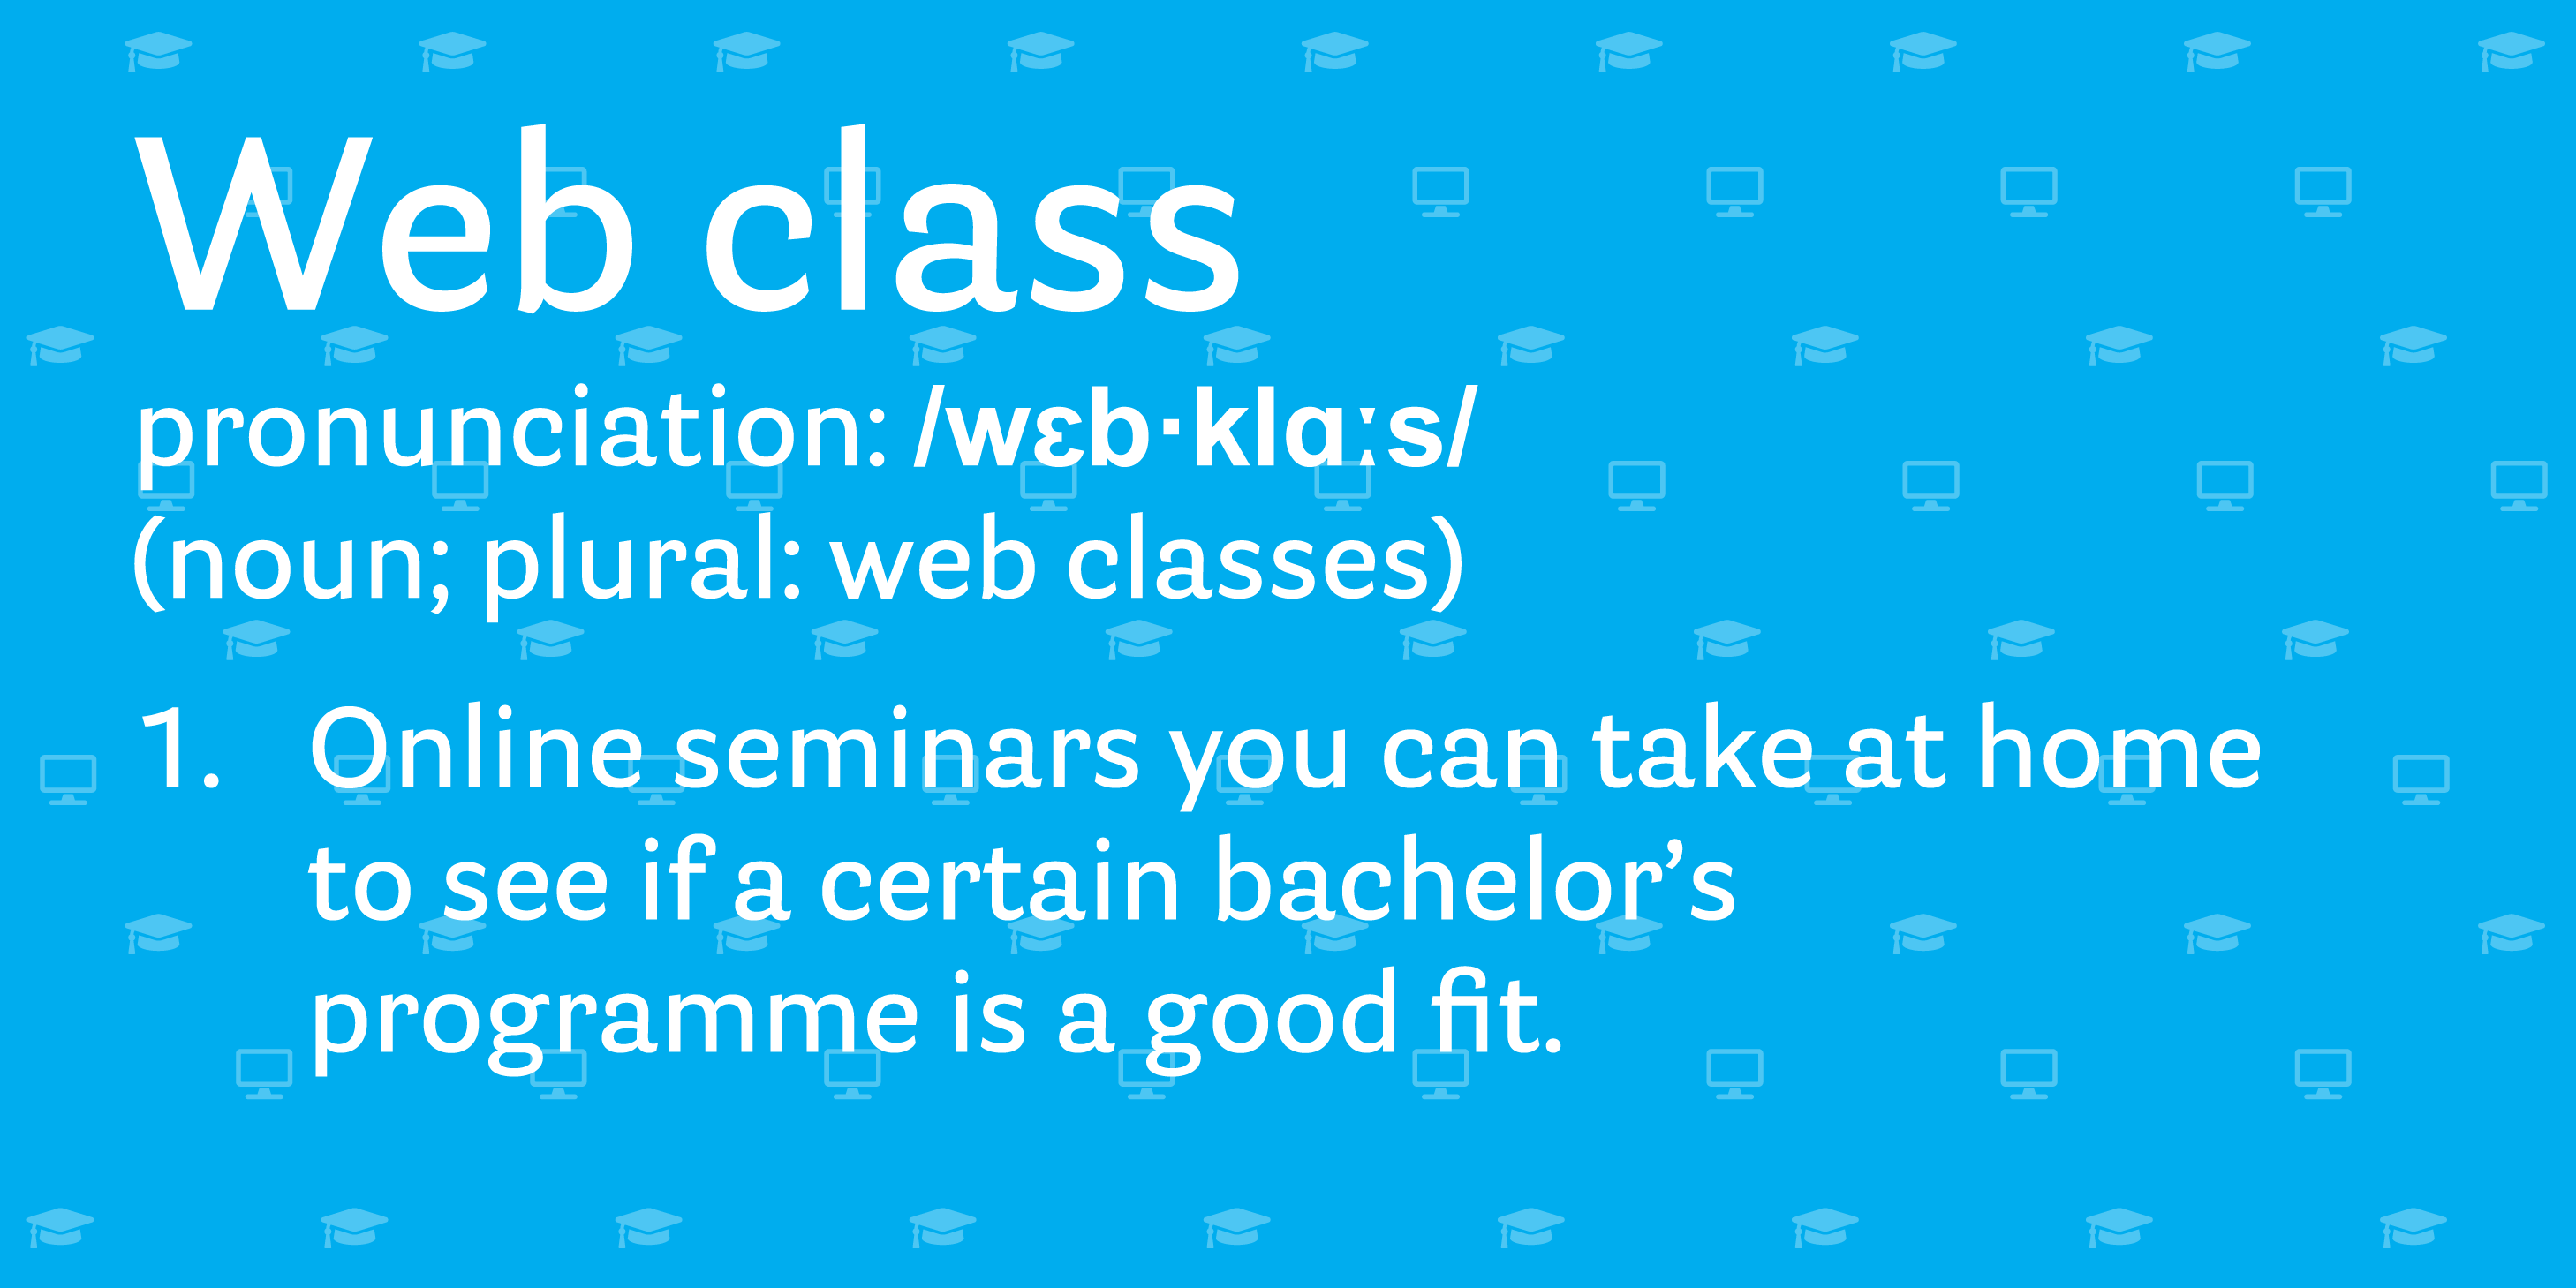 What's a web class?